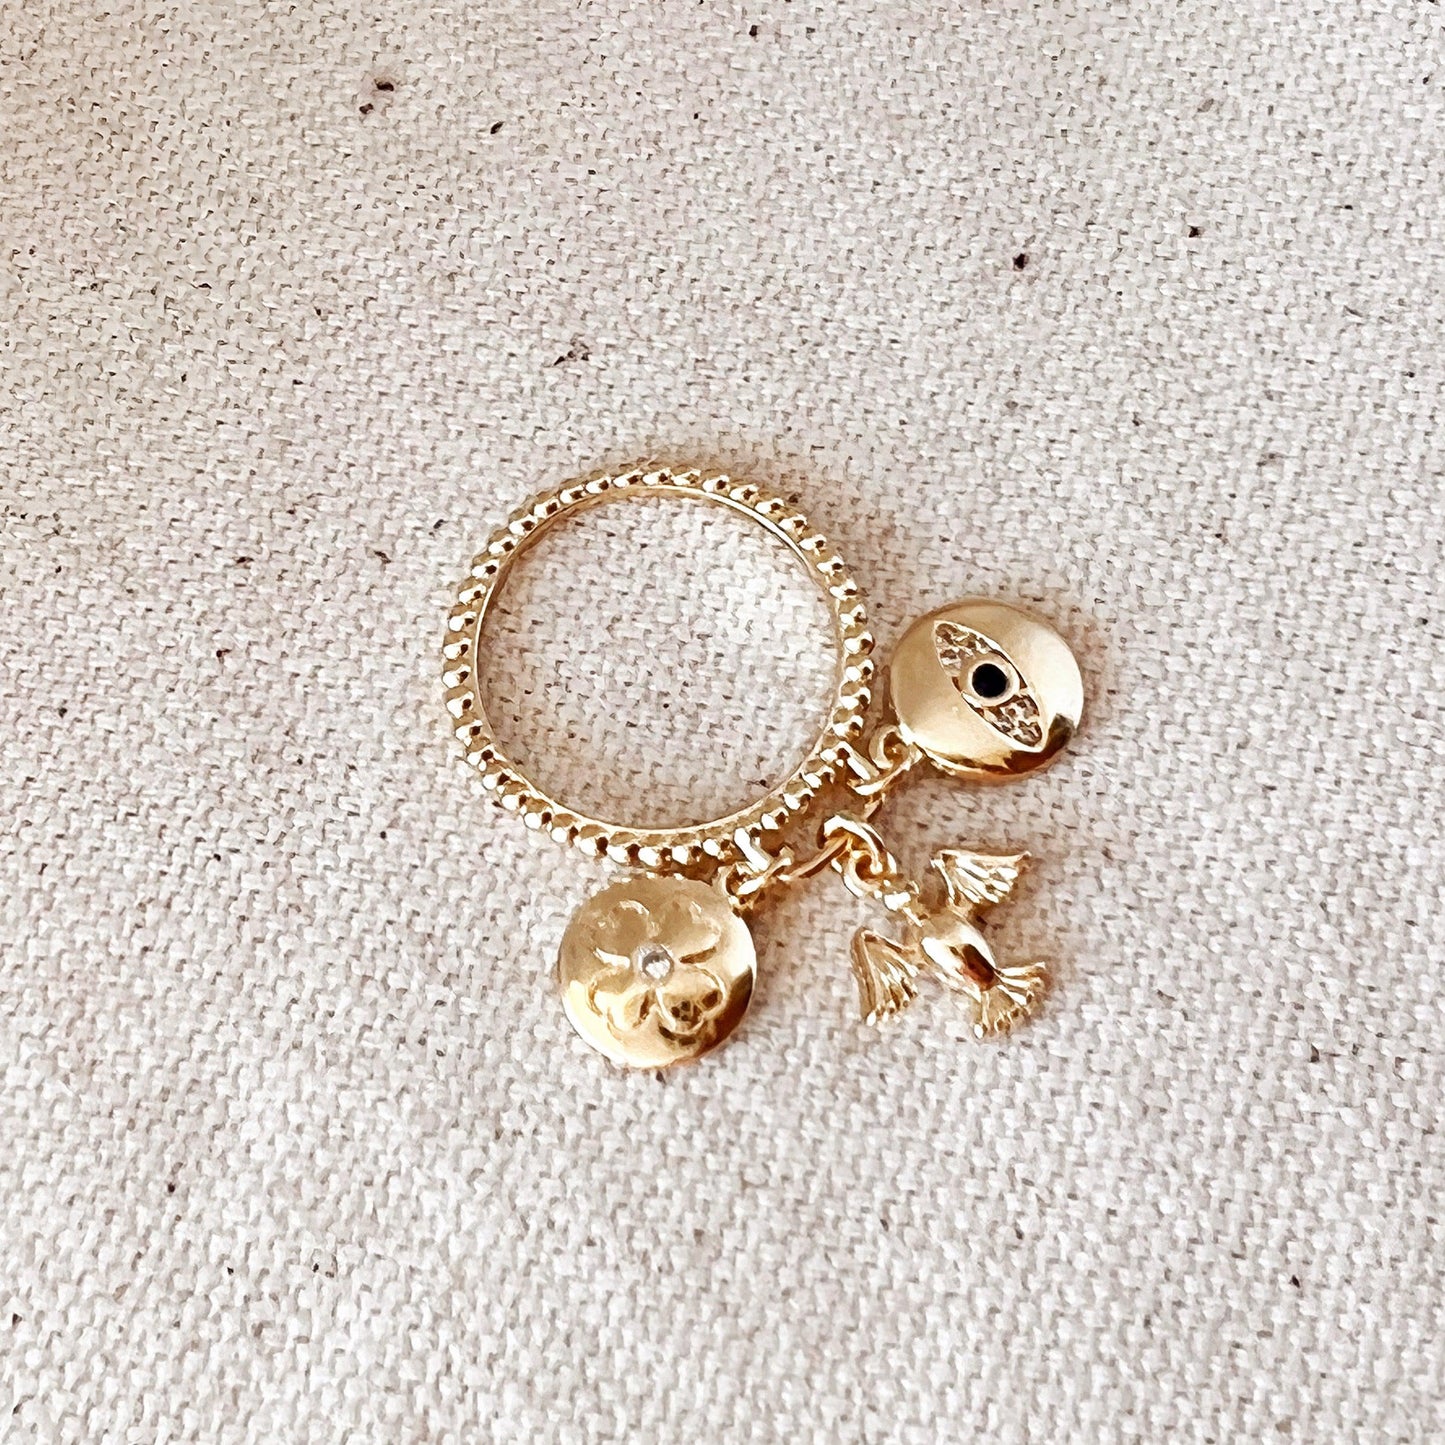 GoldFi 18k Gold Filled Protection Charms Ring